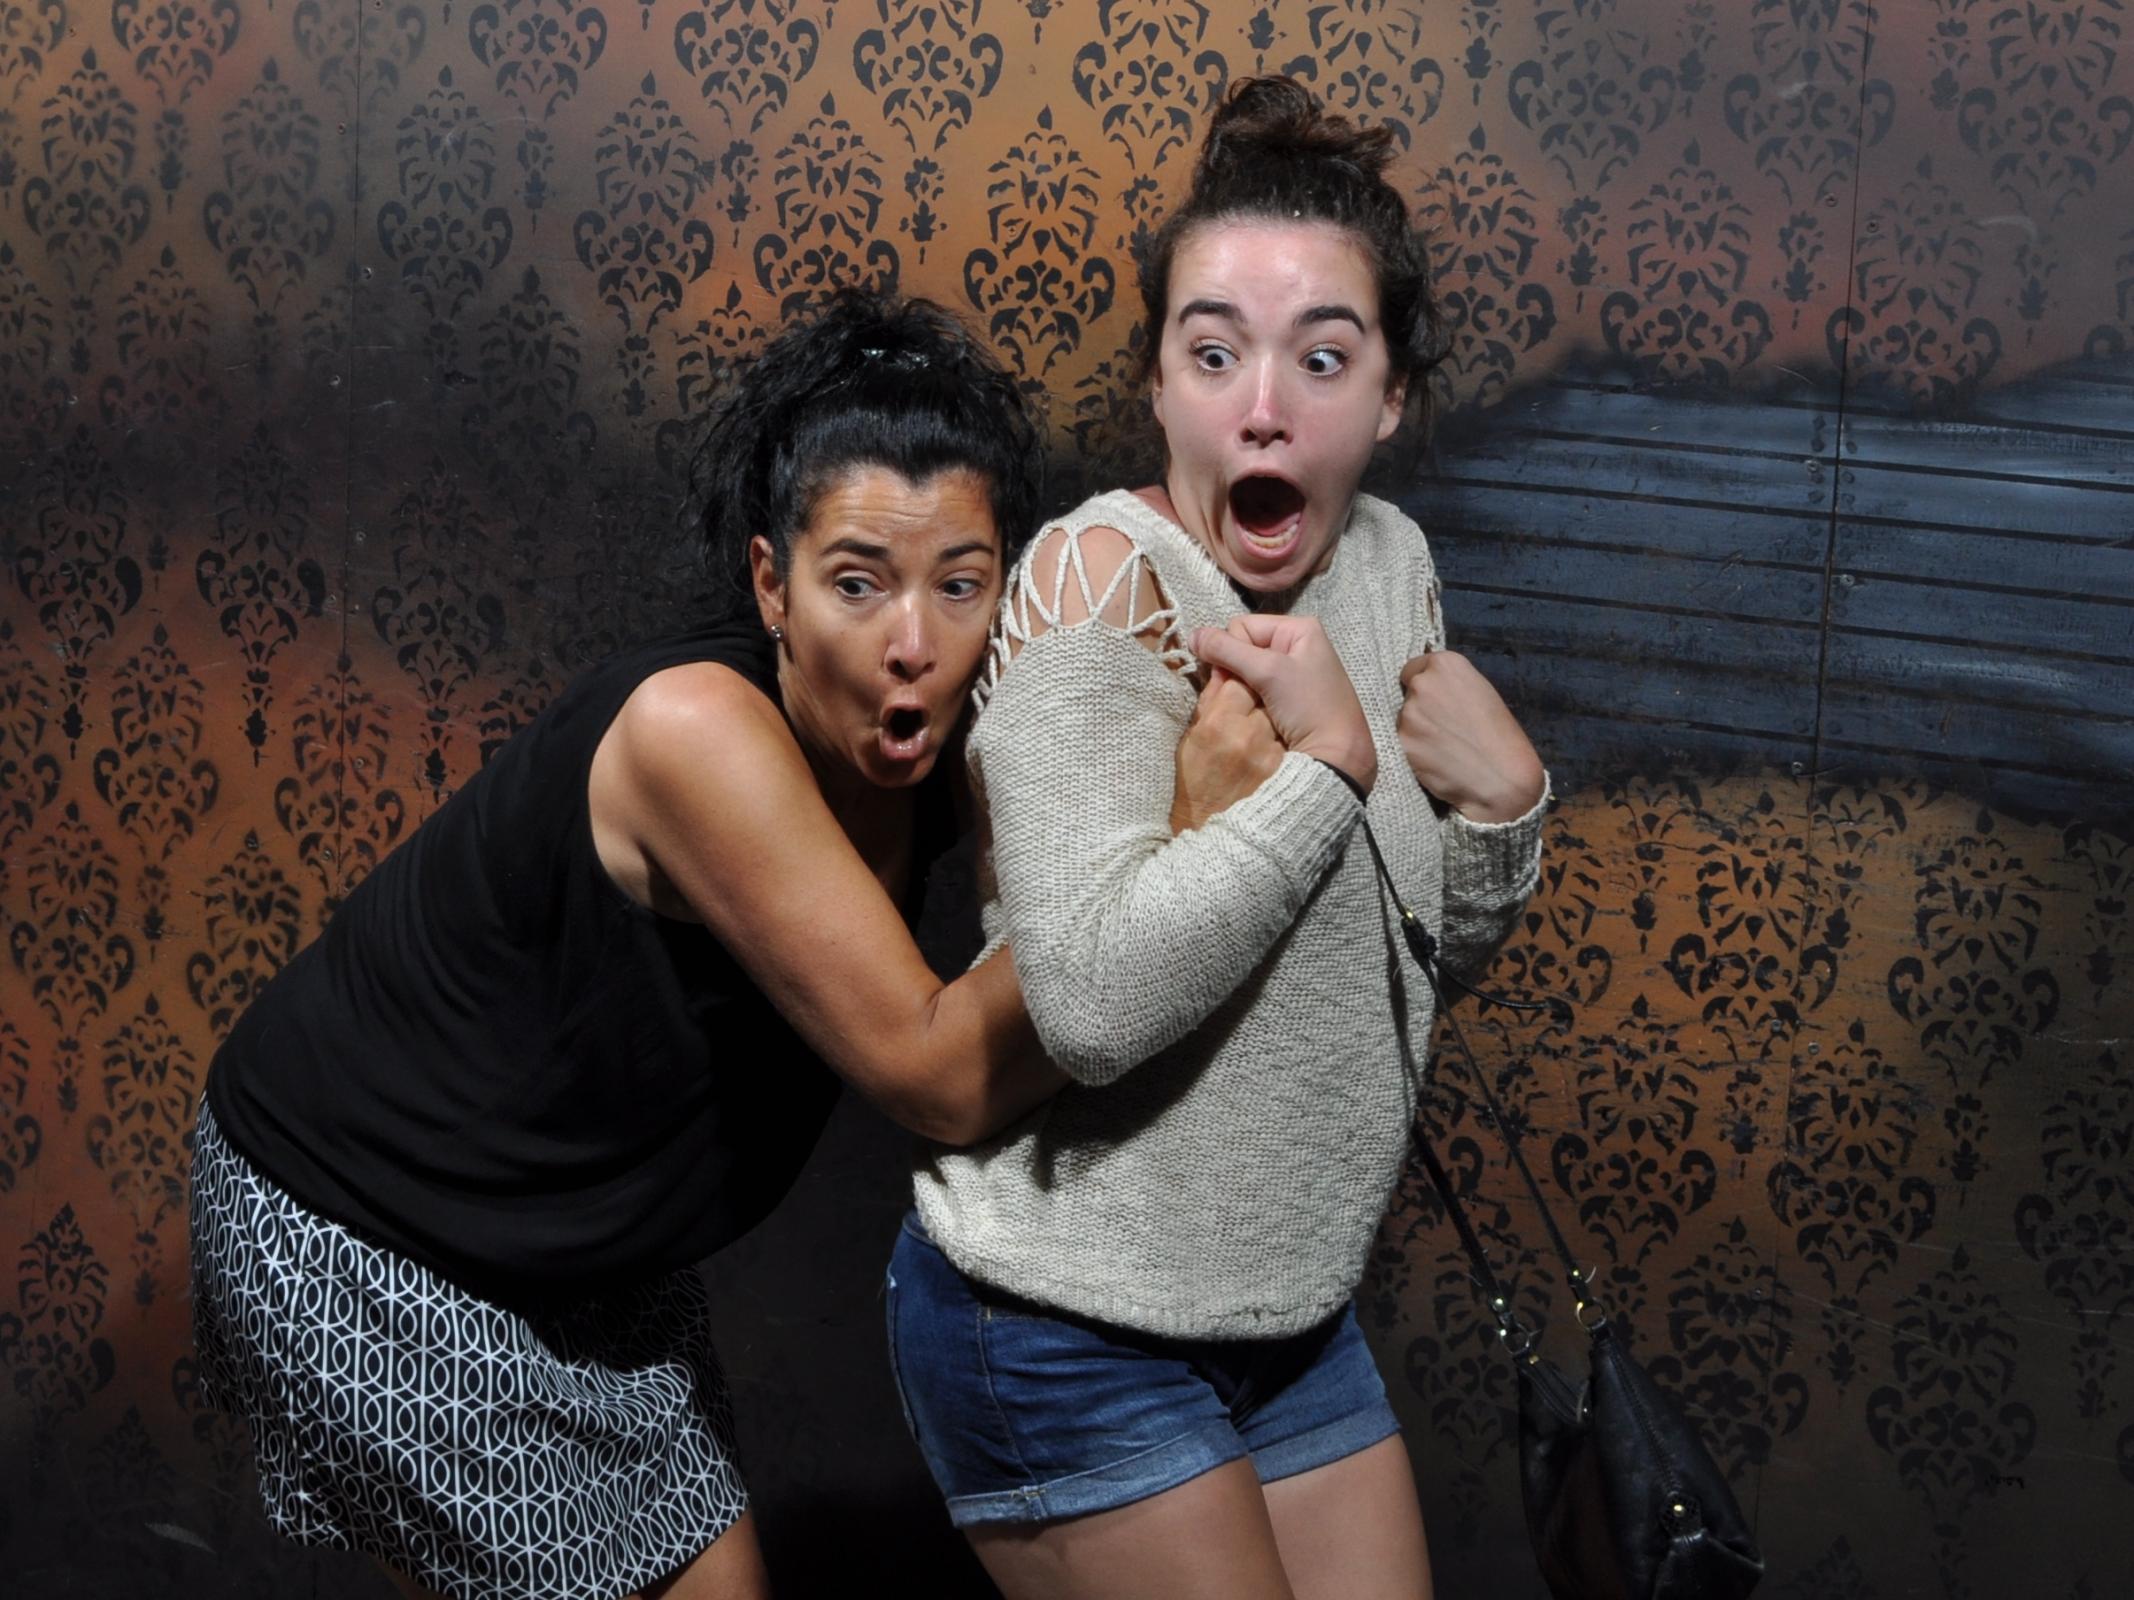 FEAR Pic for Tuesday August 16, 2016 | Nightmares Fear Factory